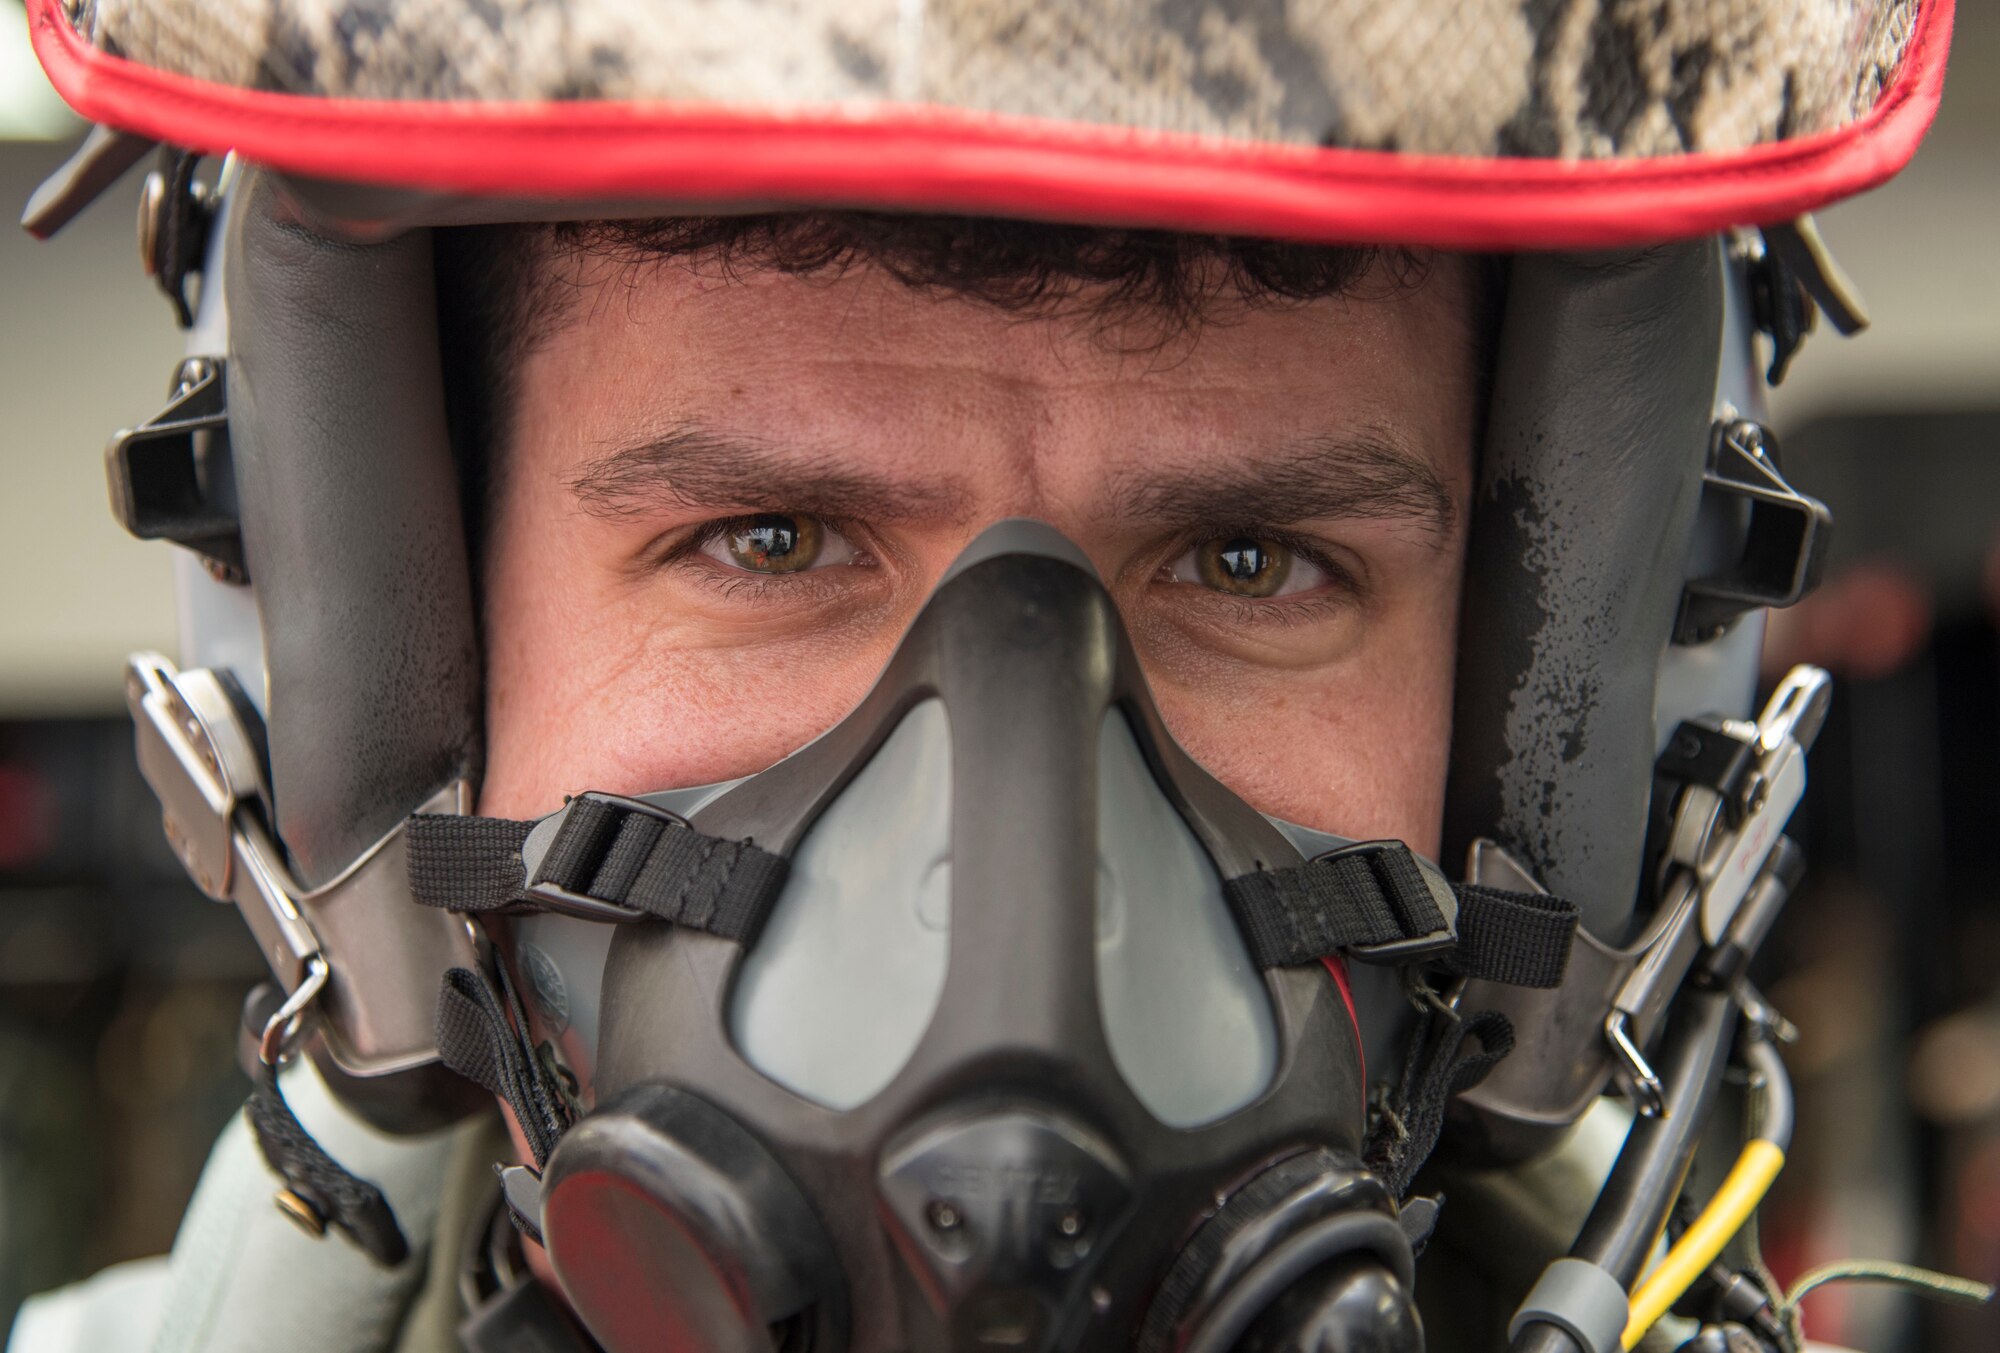 U.S. Air Force Capt. Jason Markzon, a 13th Fighter Squadron pilot, tests his MBU 20/P breathing mask at Misawa Air Base, Japan, Feb. 8, 2017. Before take-off, a preflight check is performed by aircrew flight equipments Airmen, ensuring all equipment functions properly. (U.S. Air Force photo by Airman 1st Class Sadie Colbert)